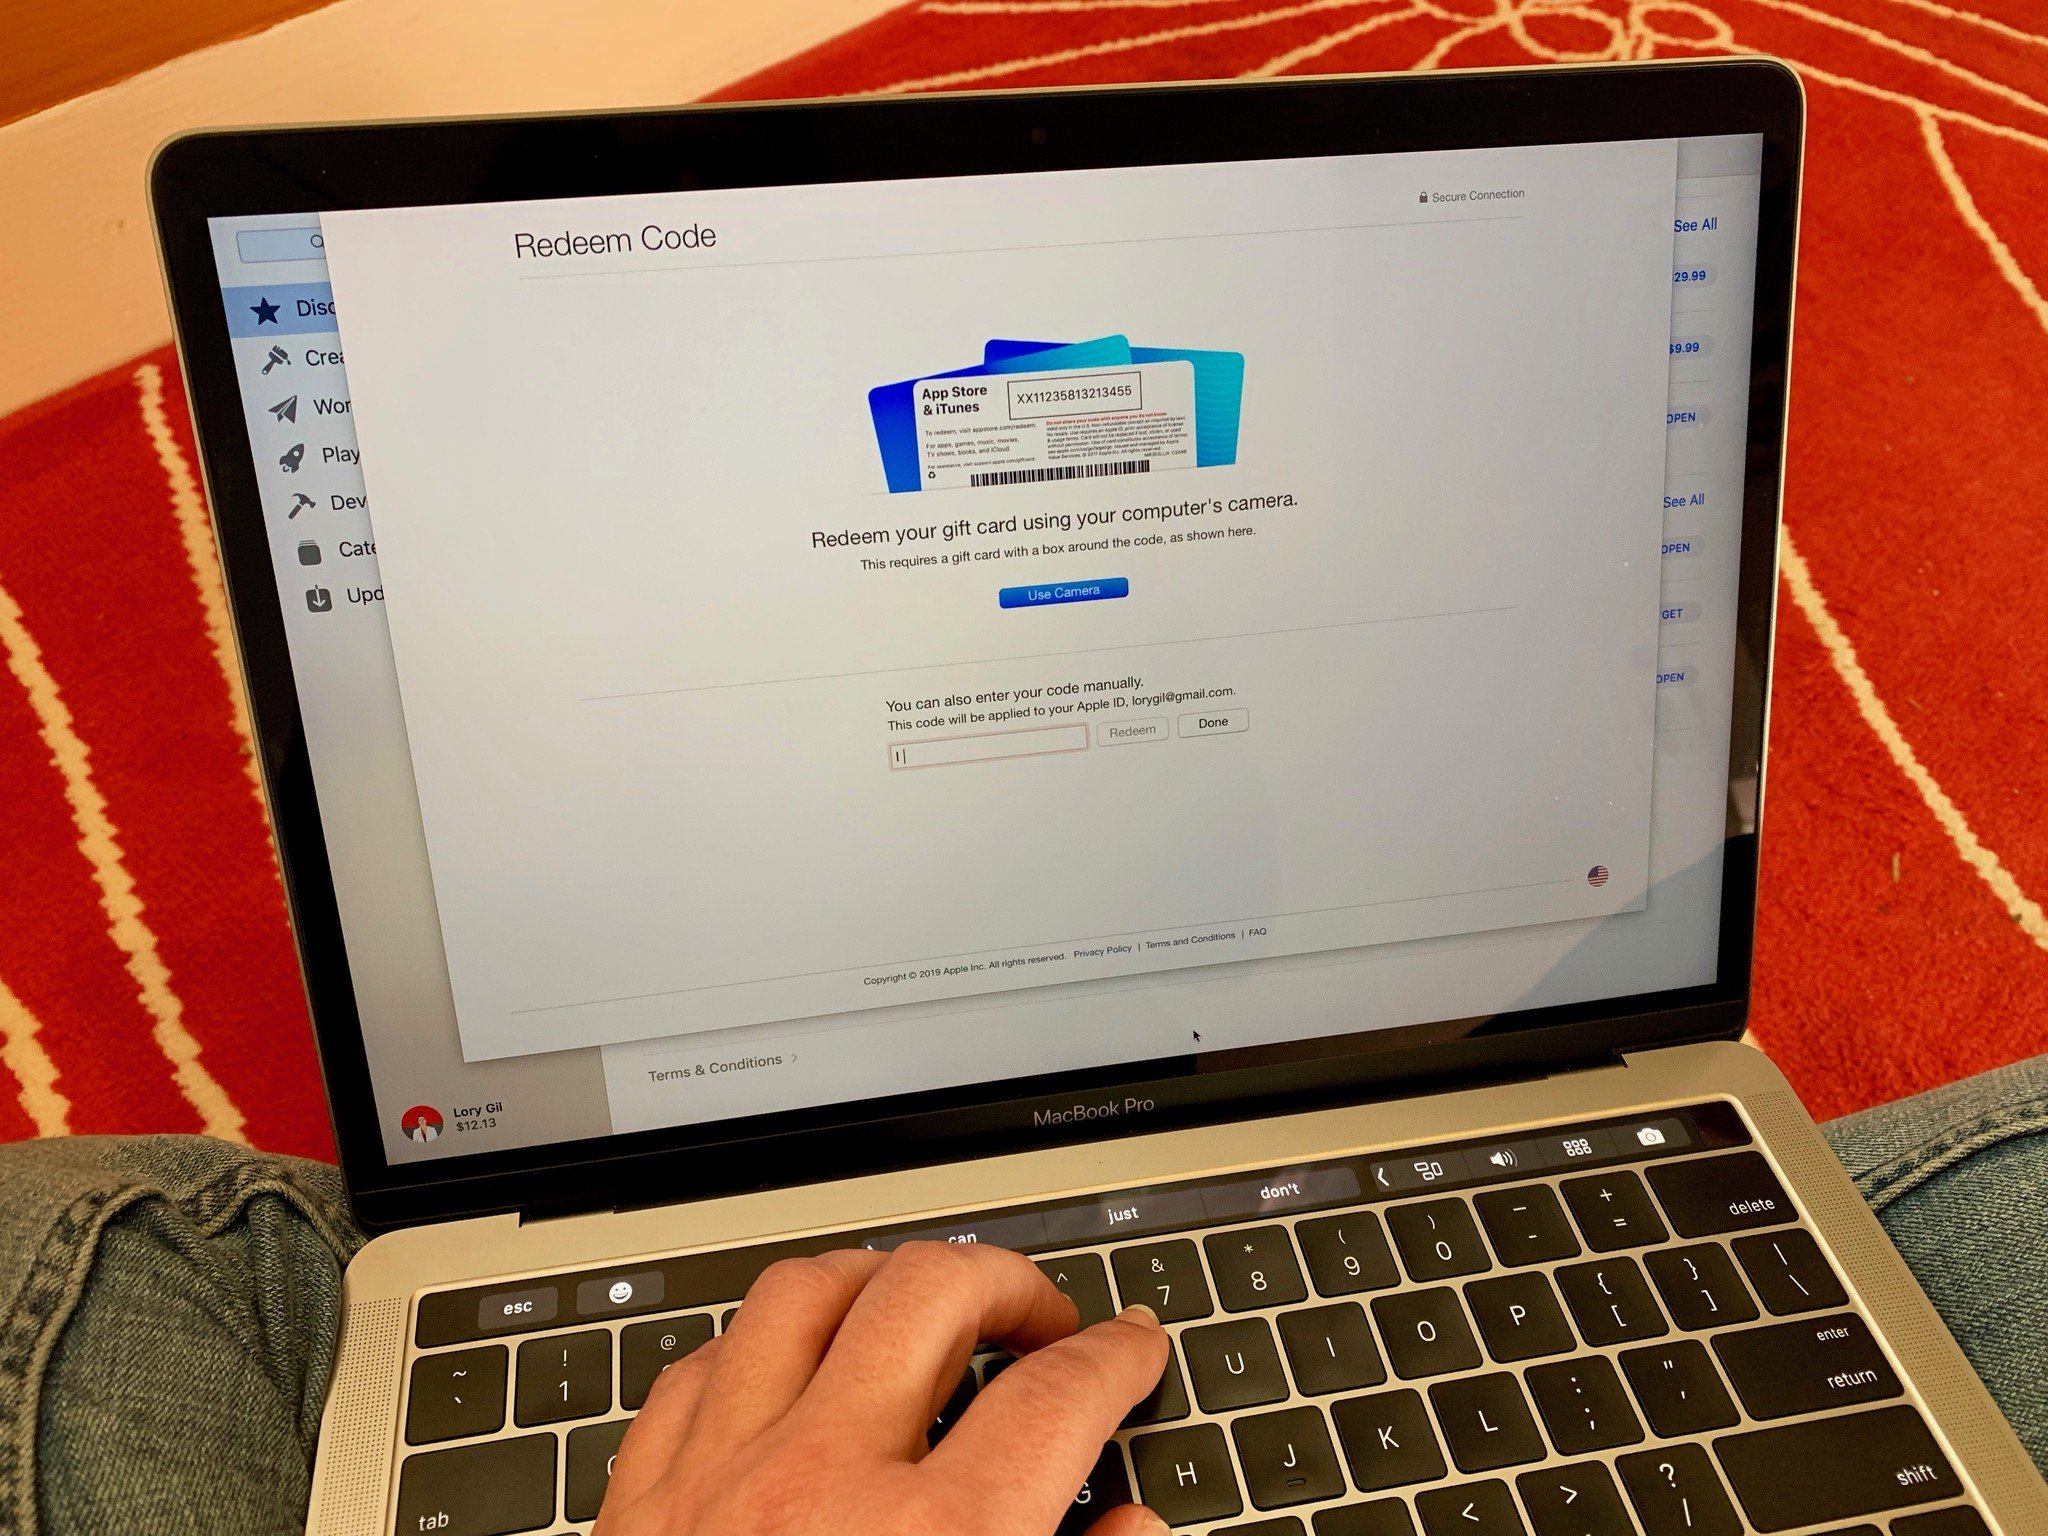 How To Redeem Apple Gift Card On Your Mac, iPhone Or iPad - iOS Hacker